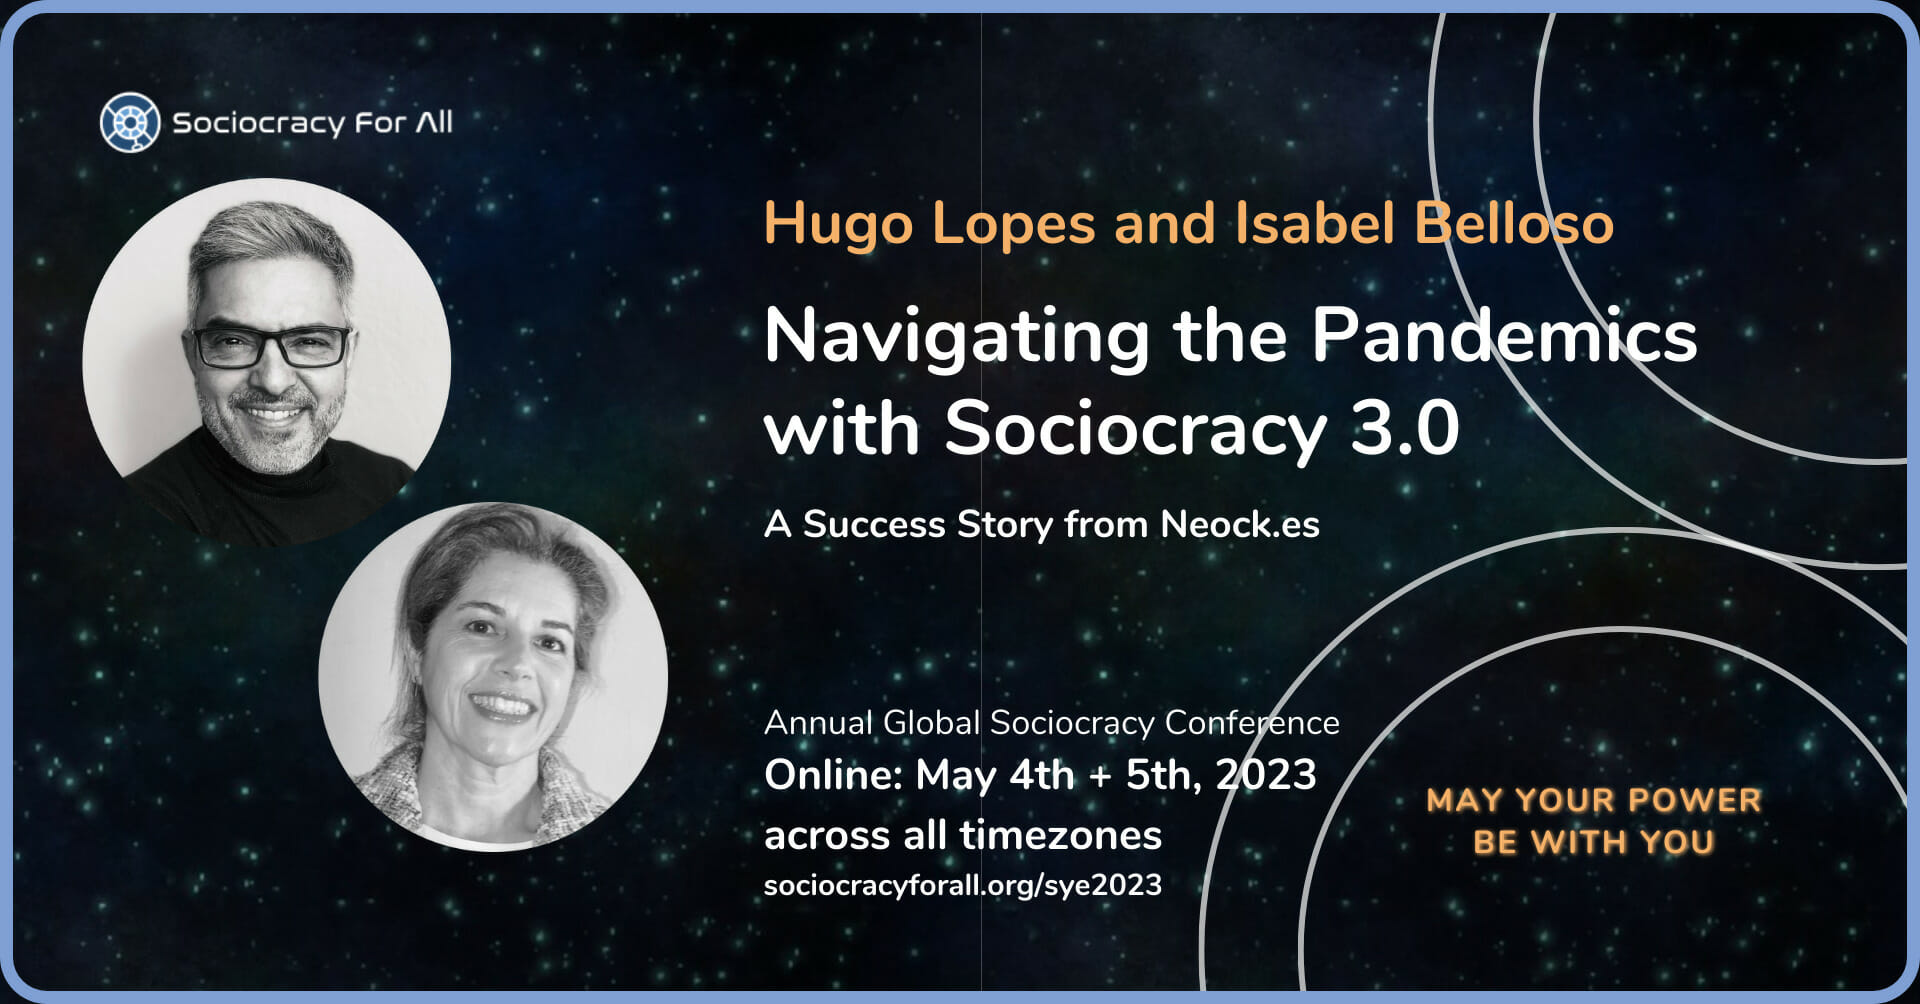 Navigating the Pandemics with Sociocracy 3.0: A Success Story from Neock.es